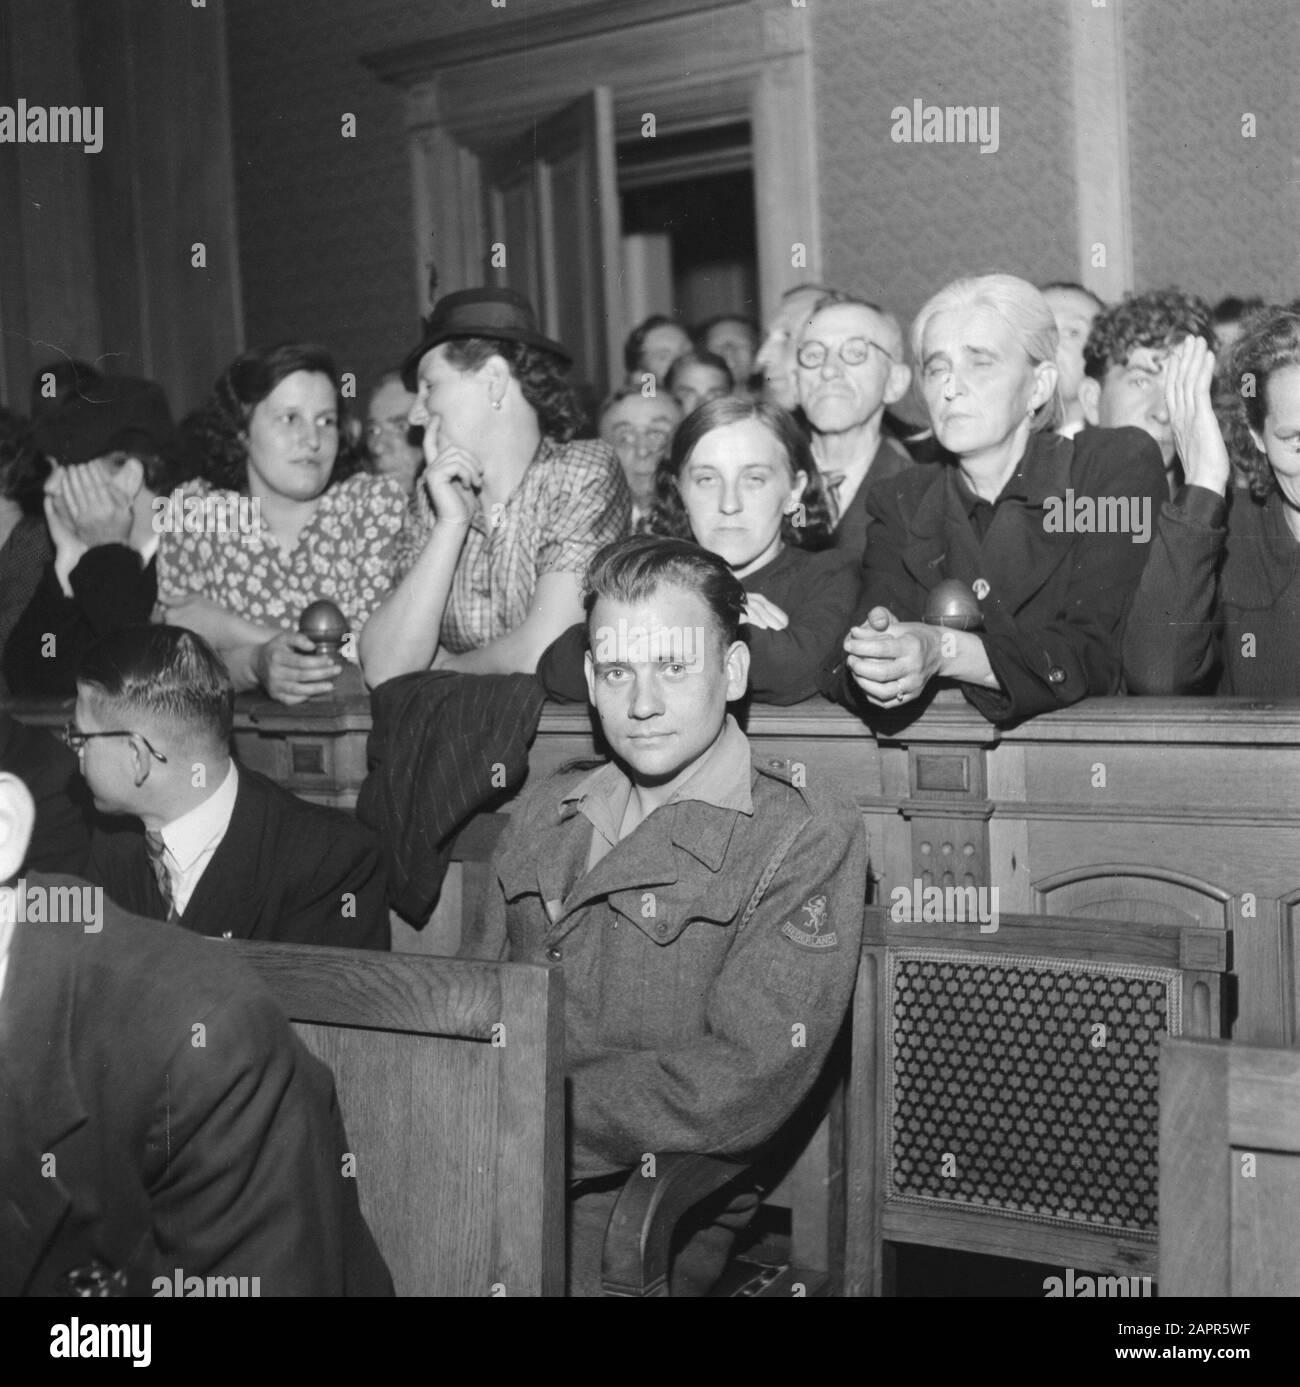 First session of the Tribunal Special Judiciary in Den Bosch  World War II, purges, jurisprudence Date: July 25, 1945 Location: Den Bosch Keywords: justice, Second World War purges Stock Photo